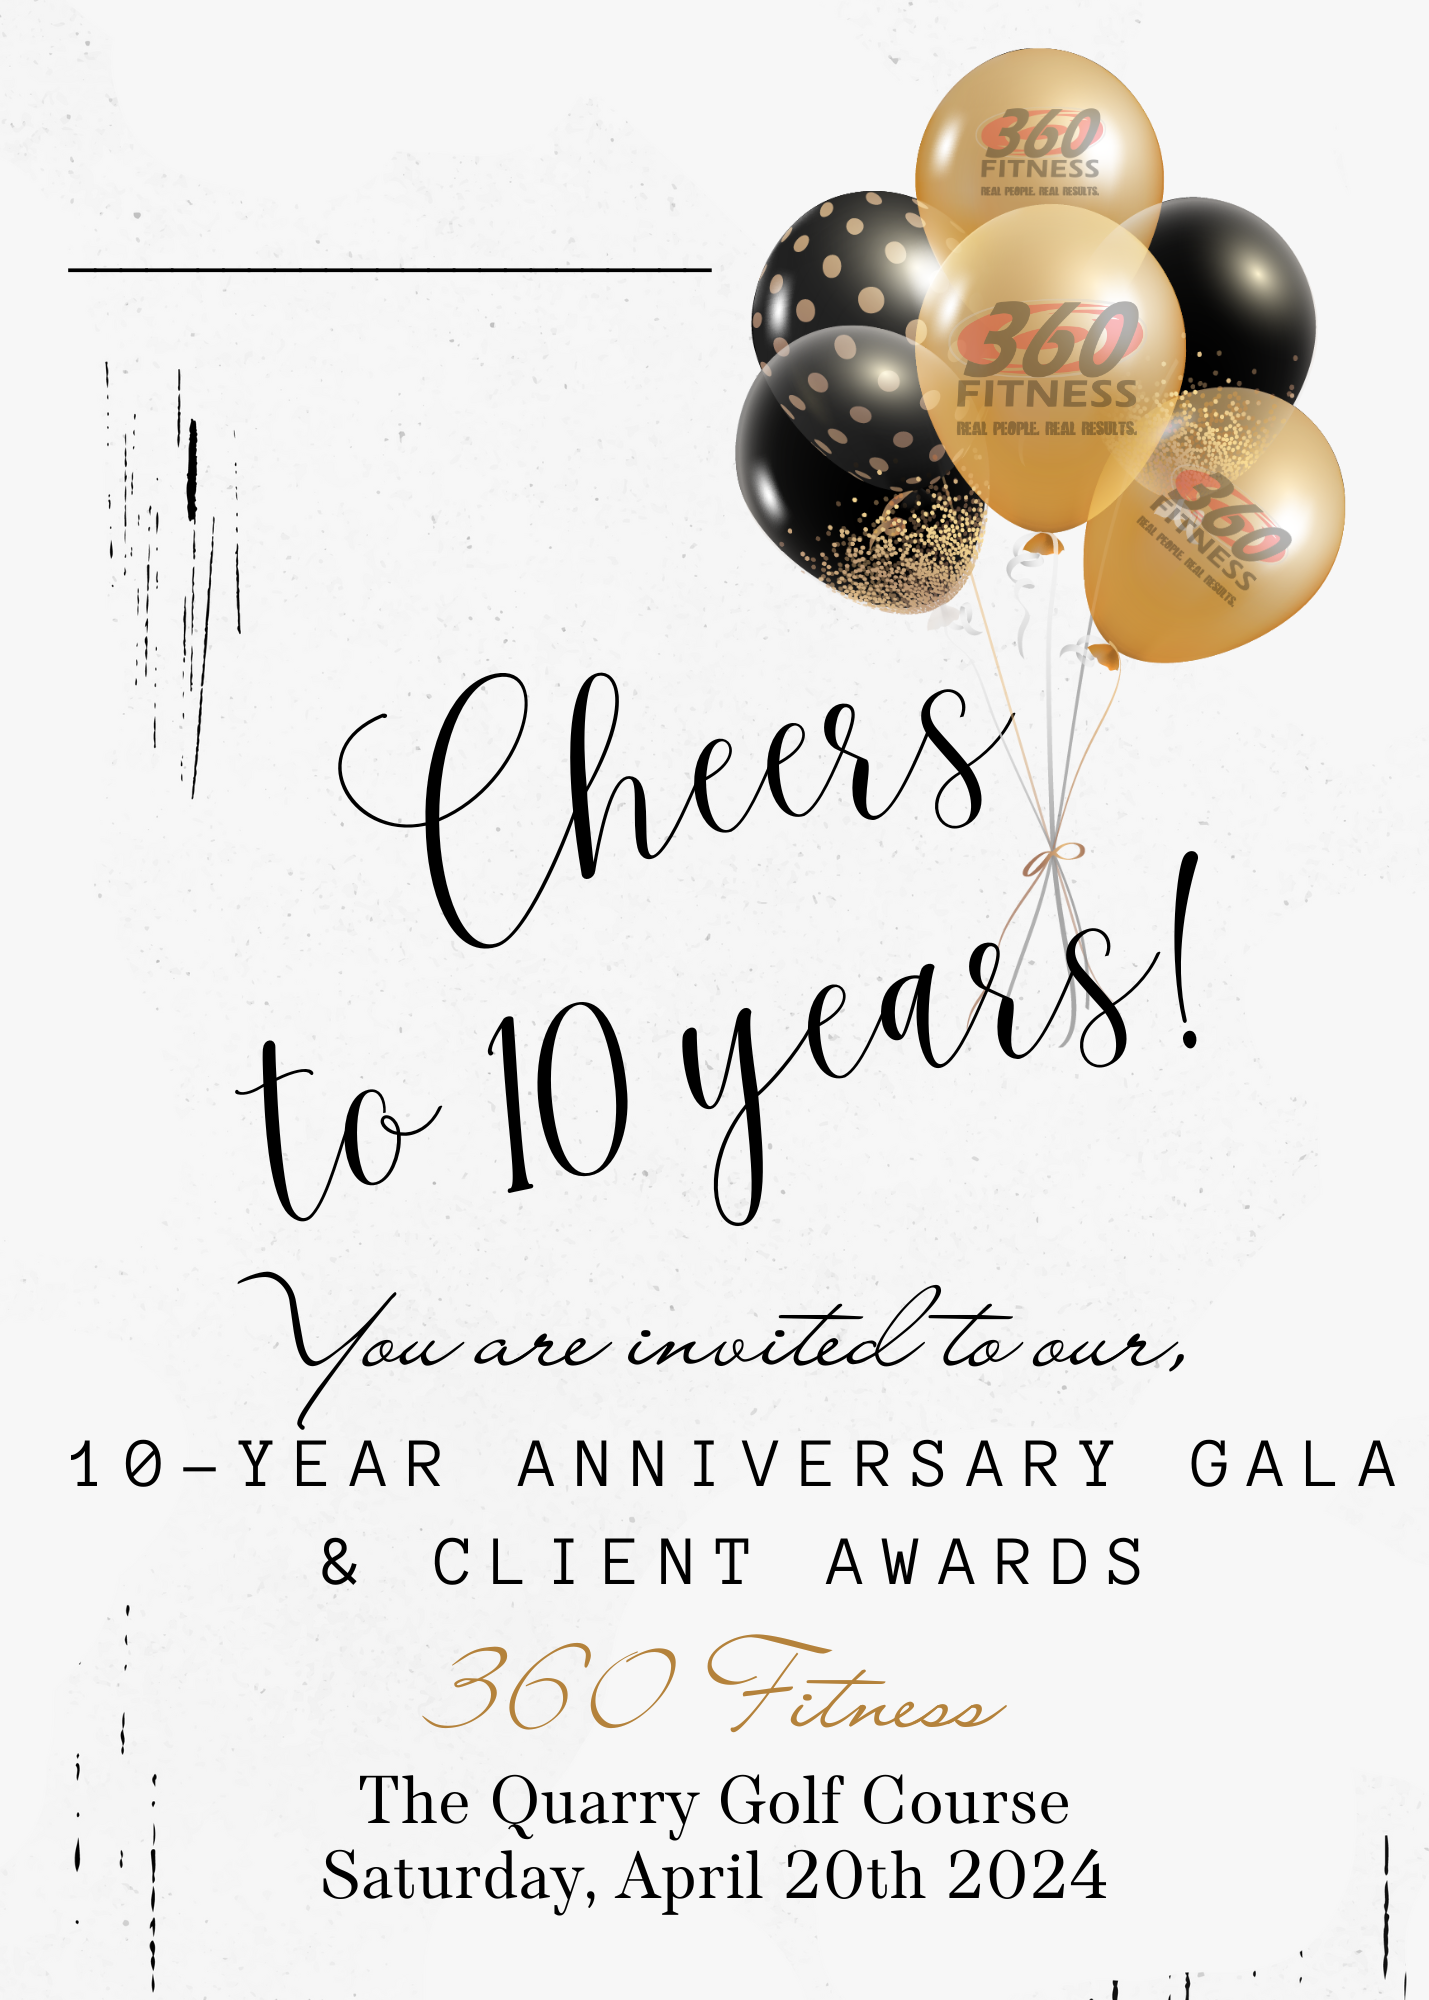 JOIN US FOR OUR 10 YEAR ANNIVERSARY & CLIENT AWARDS GALA 🤗